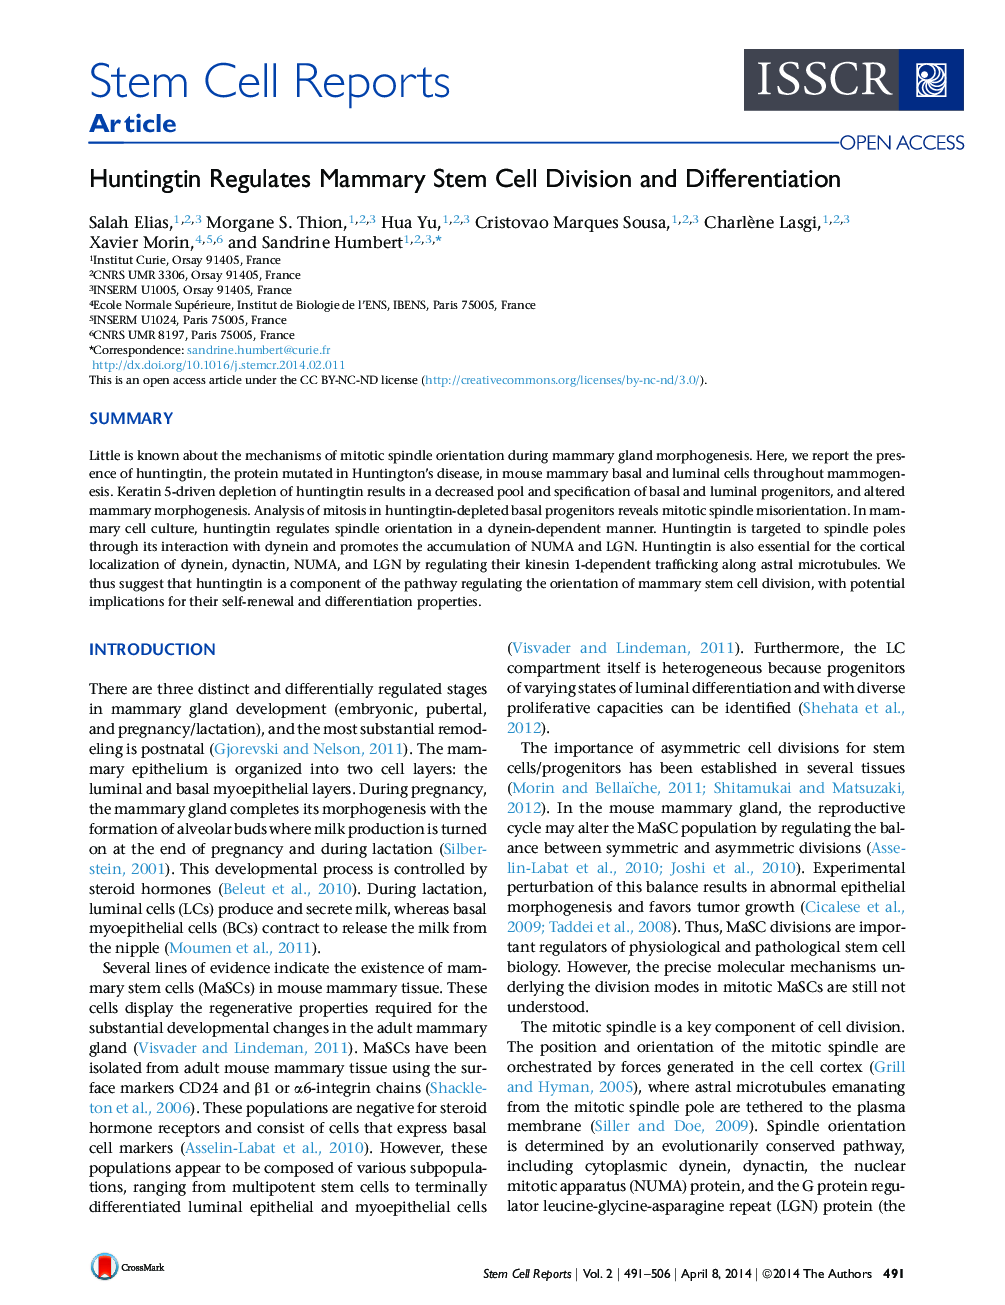 Huntingtin Regulates Mammary Stem Cell Division and Differentiation 